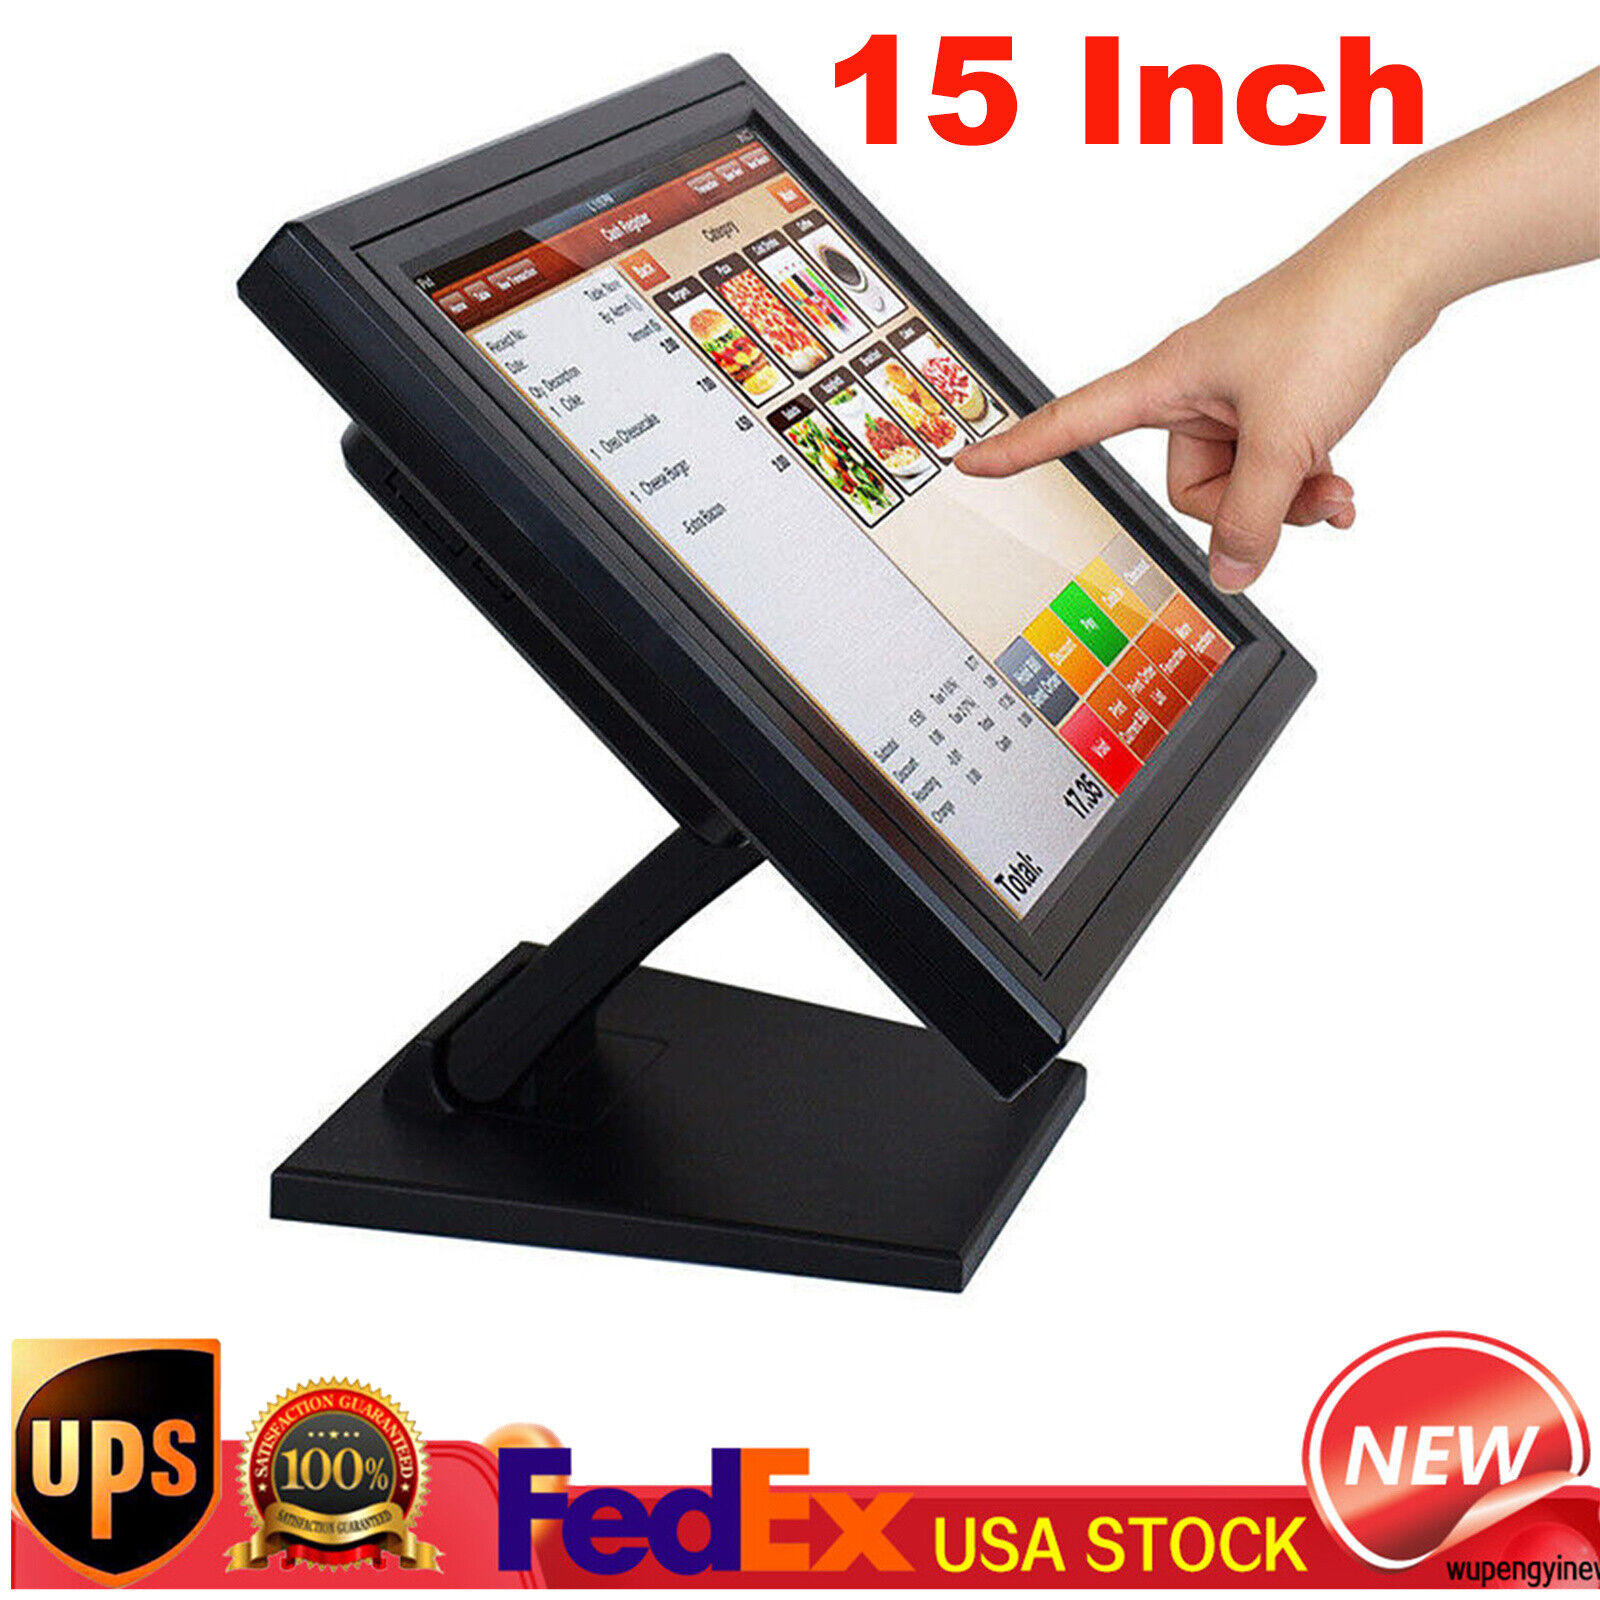 15 inch Electronic Touch Screen Monitor Commercial POS Cash Register for Retail